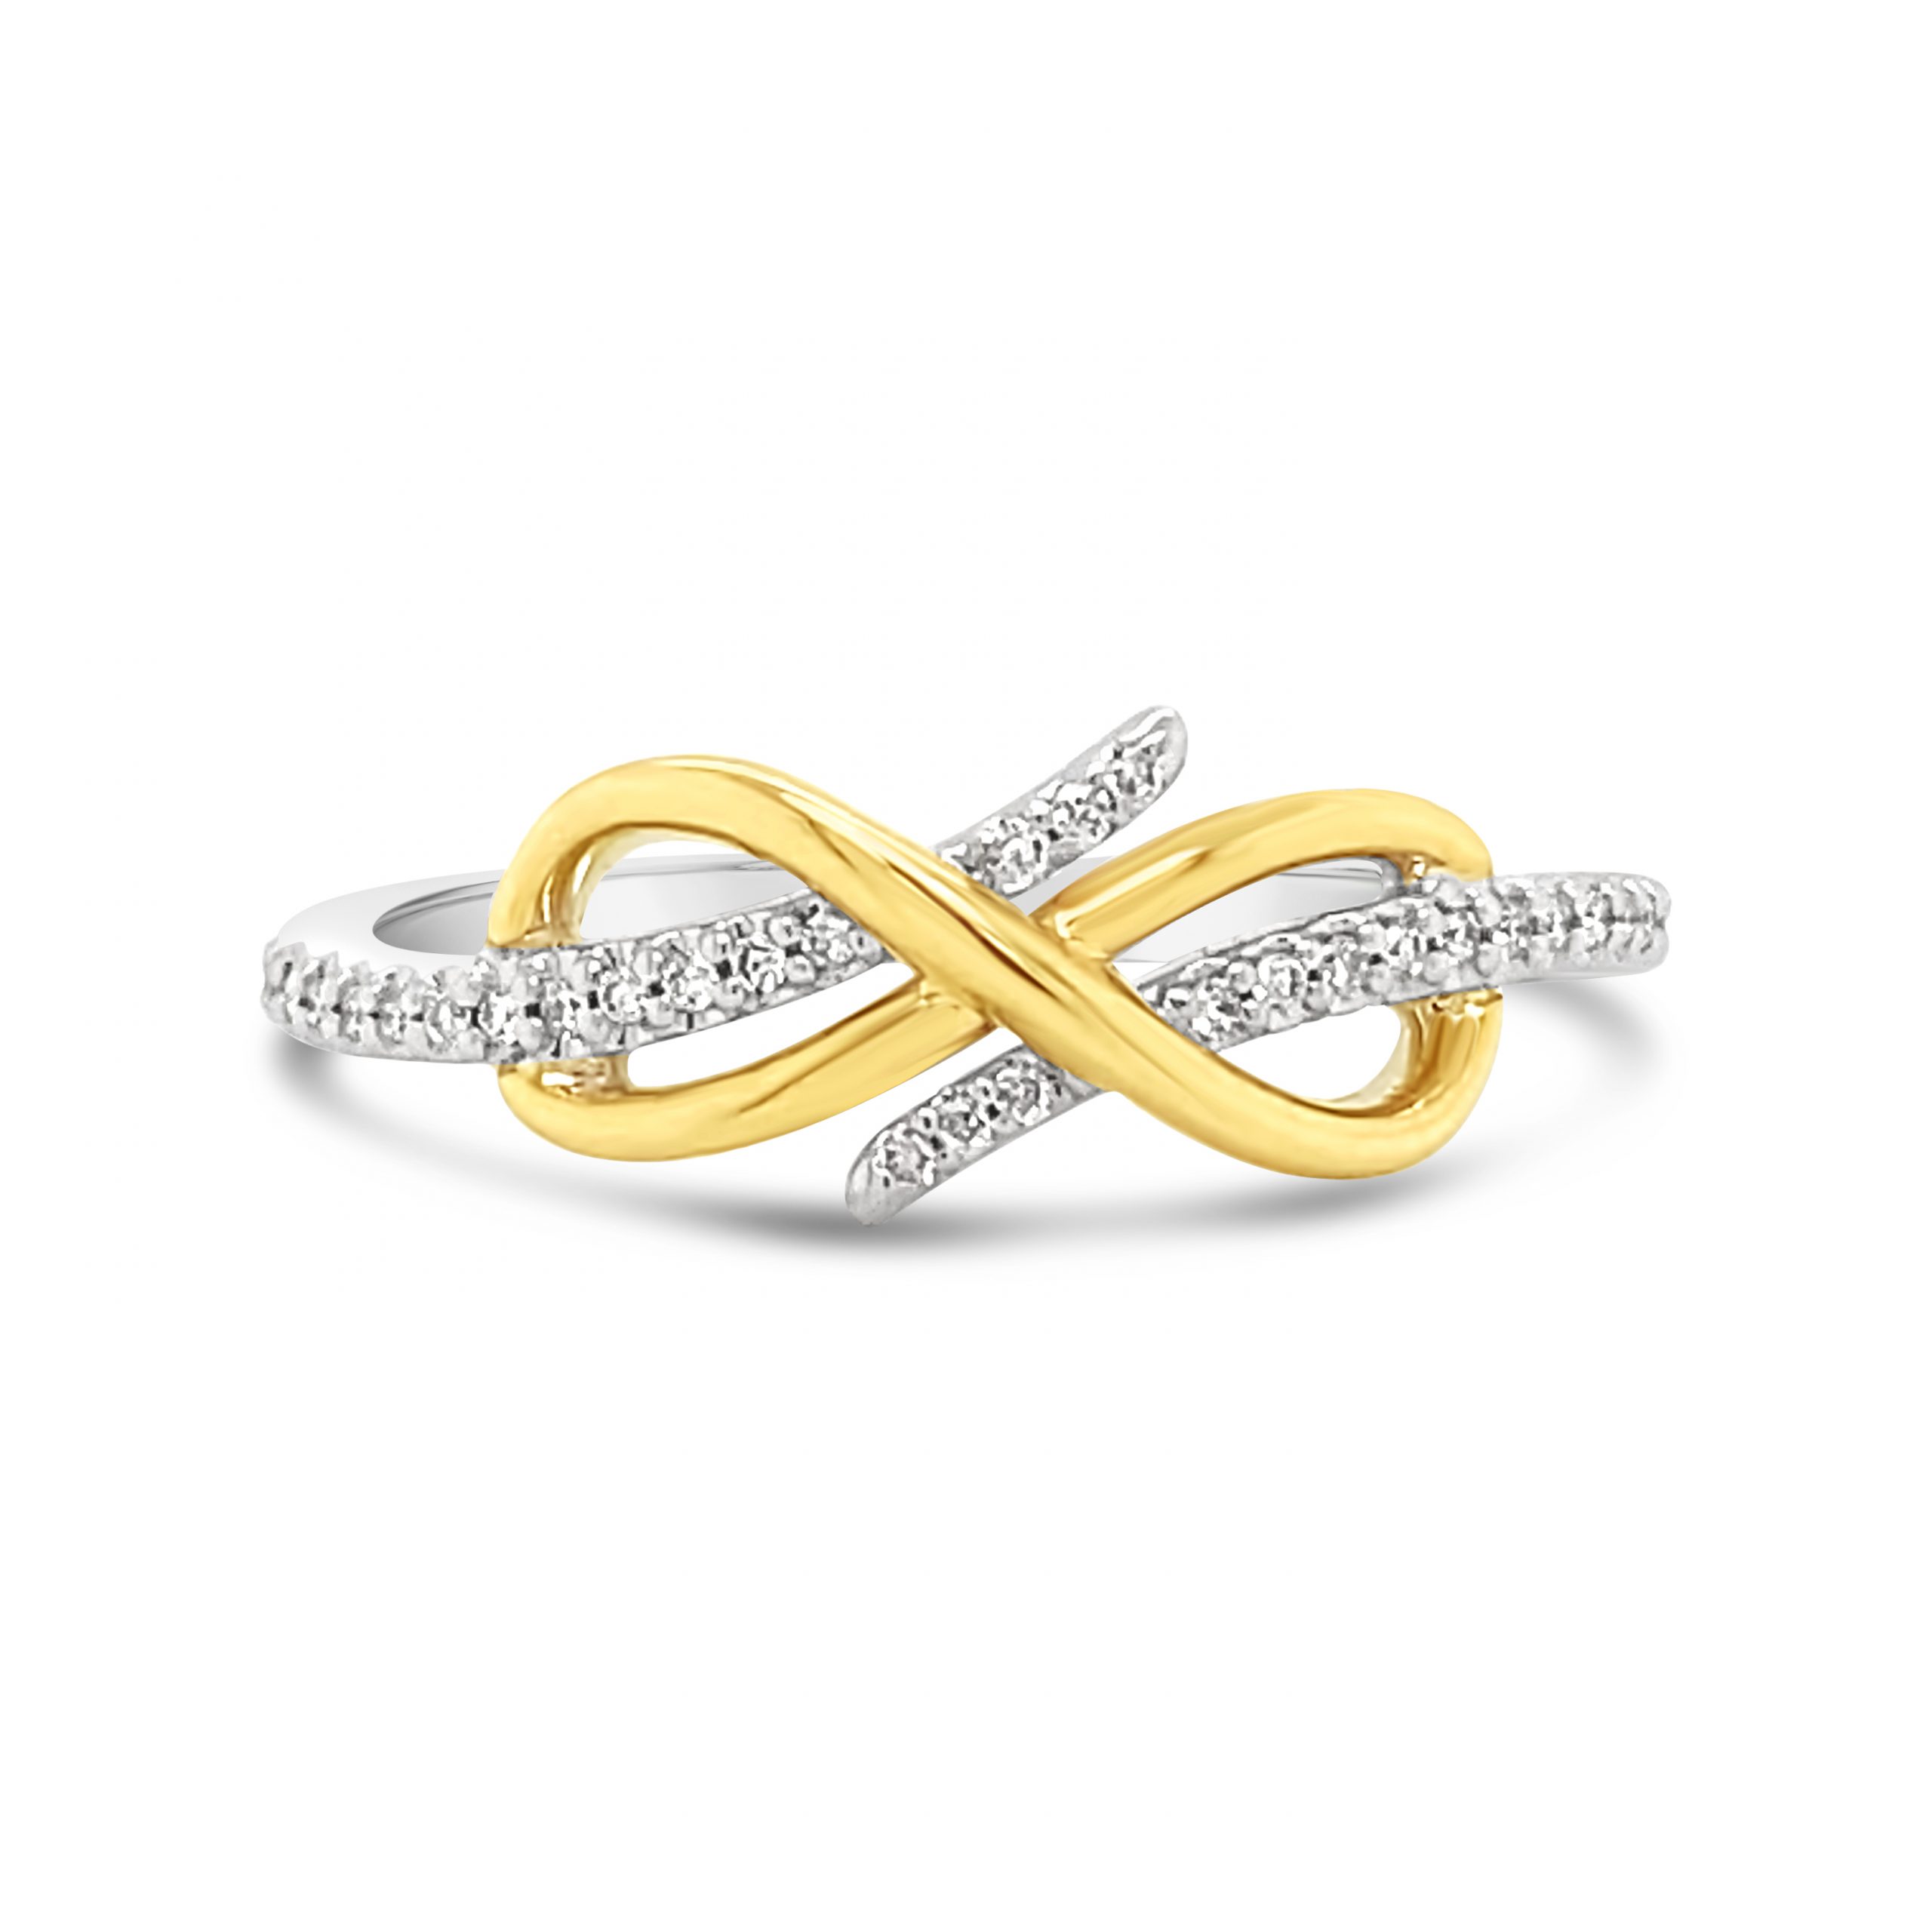 Unique 14K White Gold 2 Stone Diamond Infinity Ring for Women by Luxurman  0.4ct 802915